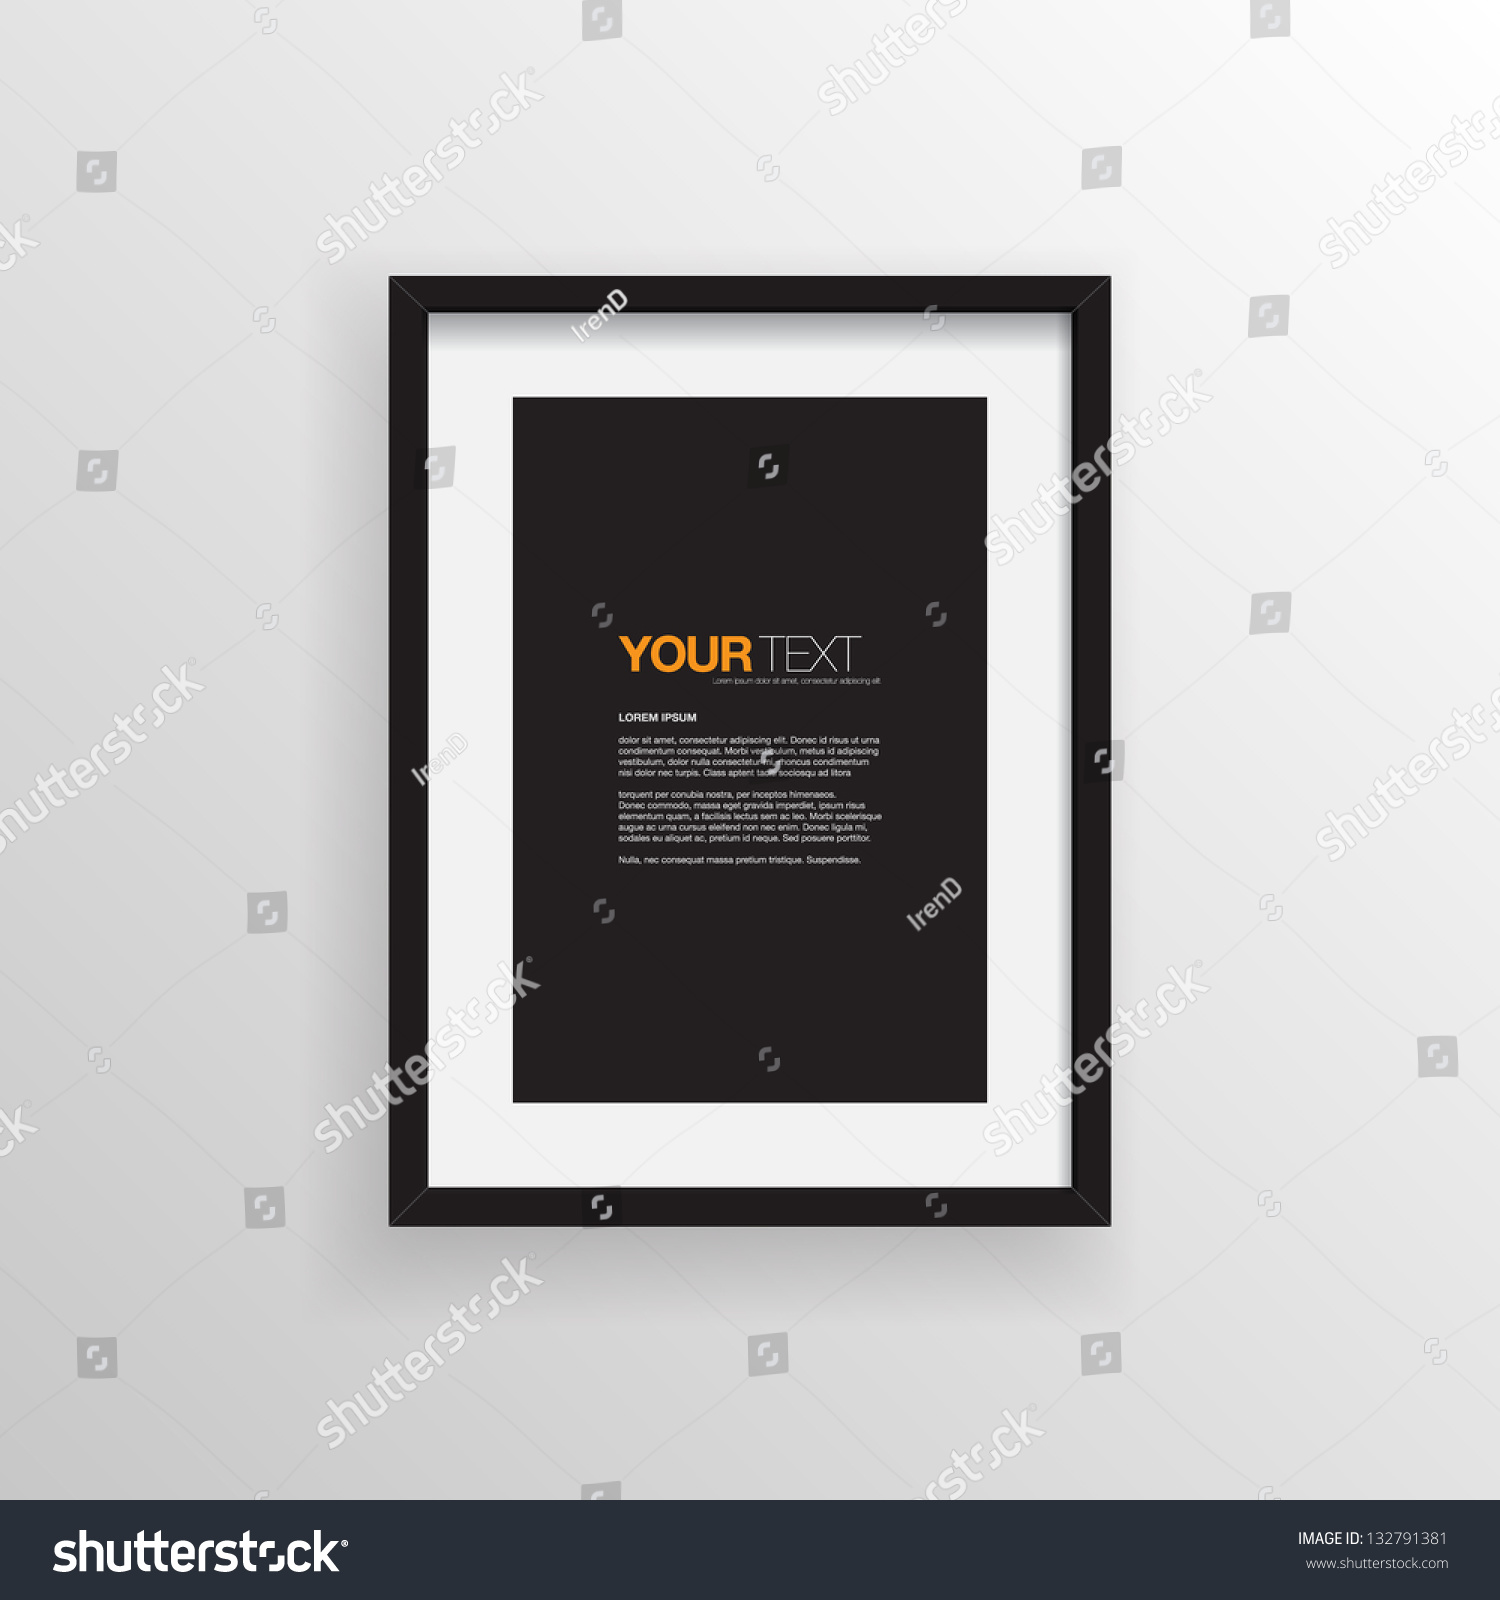 A4 / A3 Format paper design vector with text, picture frame and shadow #132791381